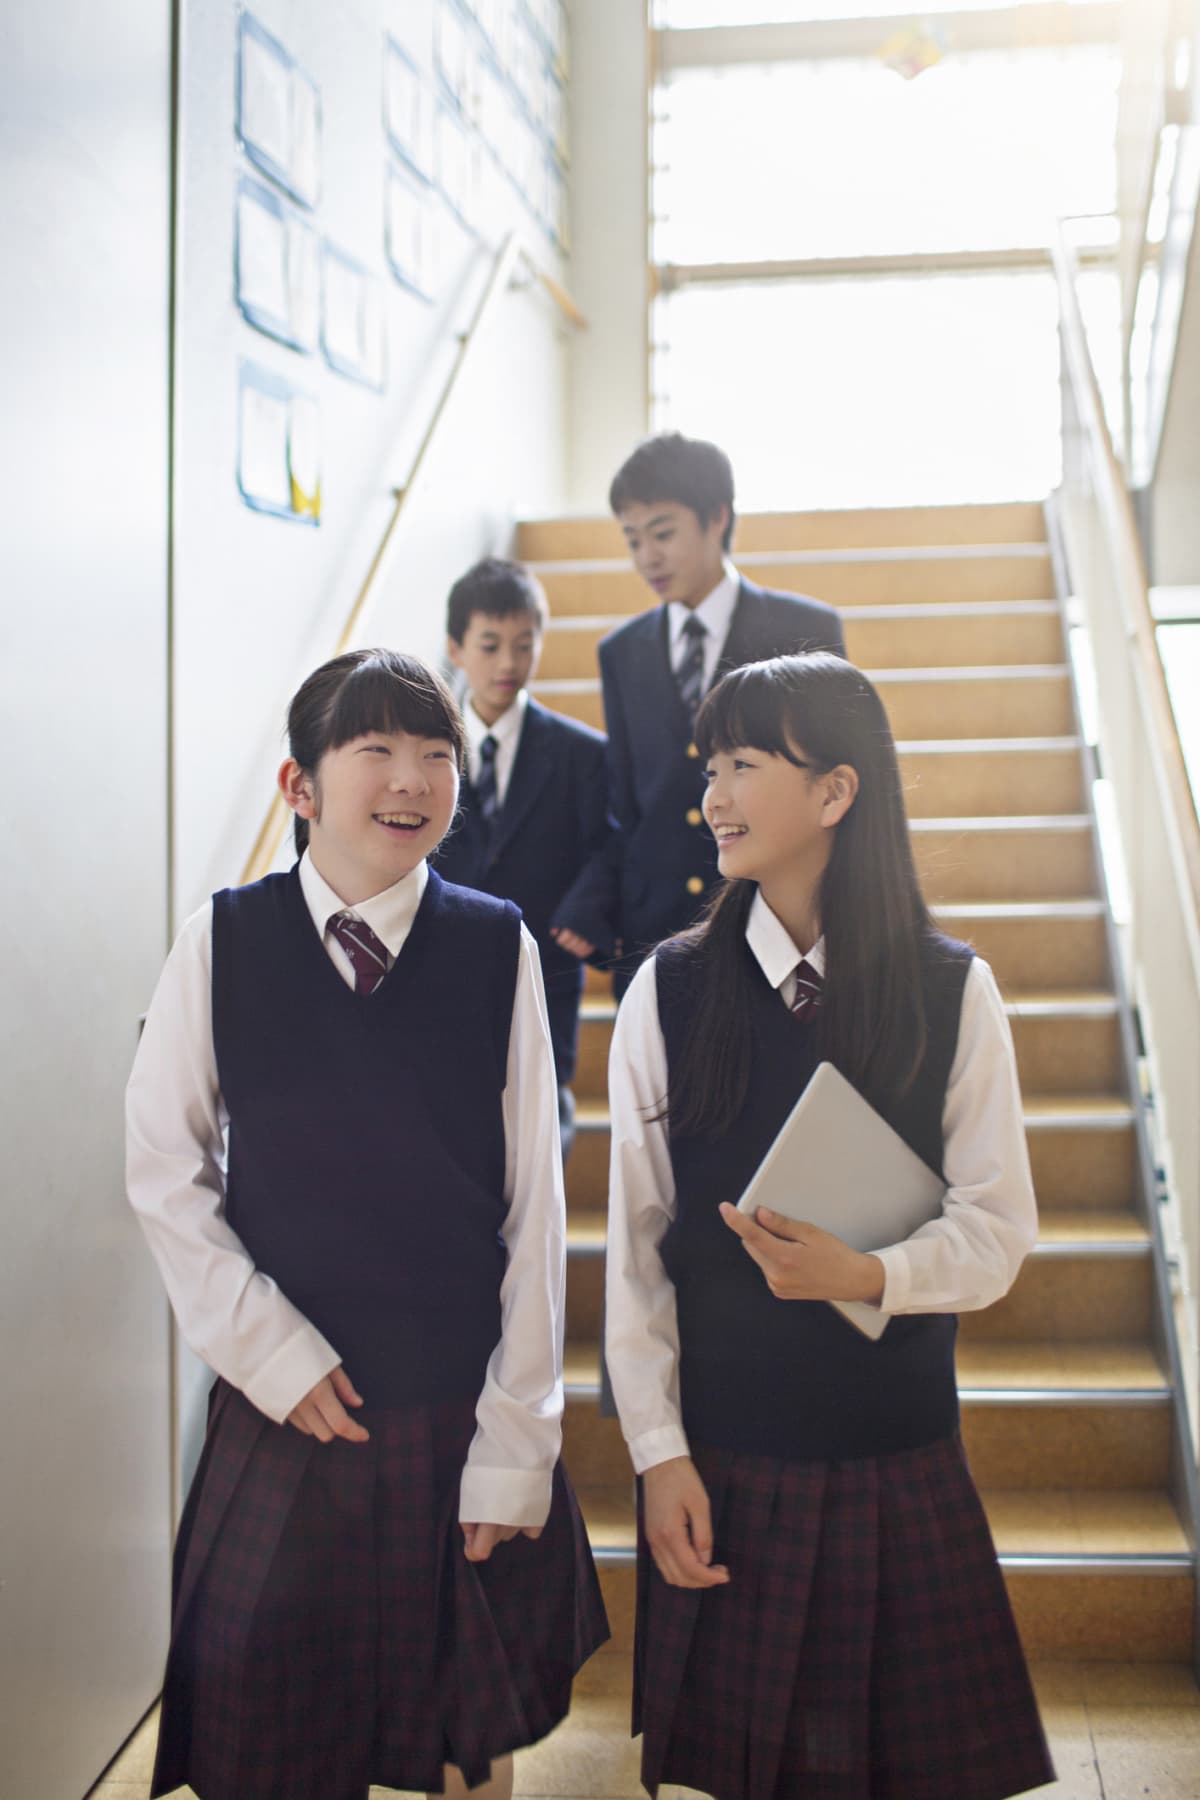 Japanese students walking in the school staircase.